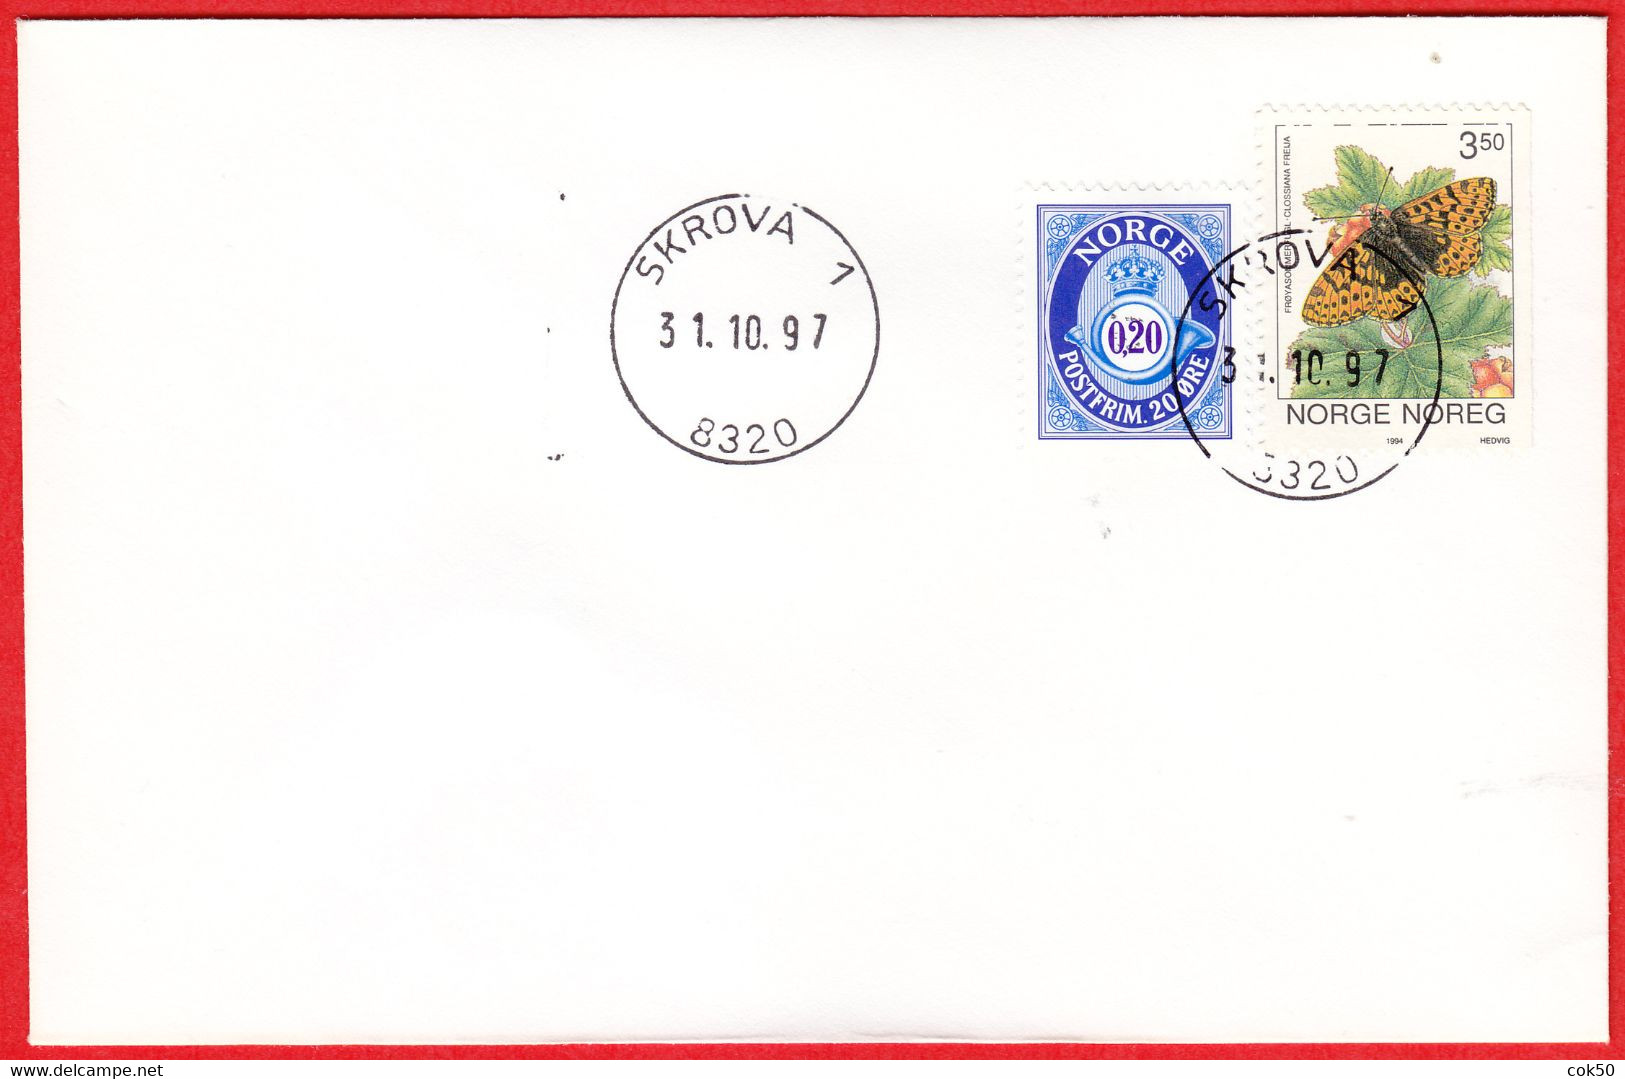 NORWAY -  8320 SKROVA 1 Ø24 Mm (Nordland County) - Last Day/postoffice Closed On 1997.10.31 - Local Post Stamps